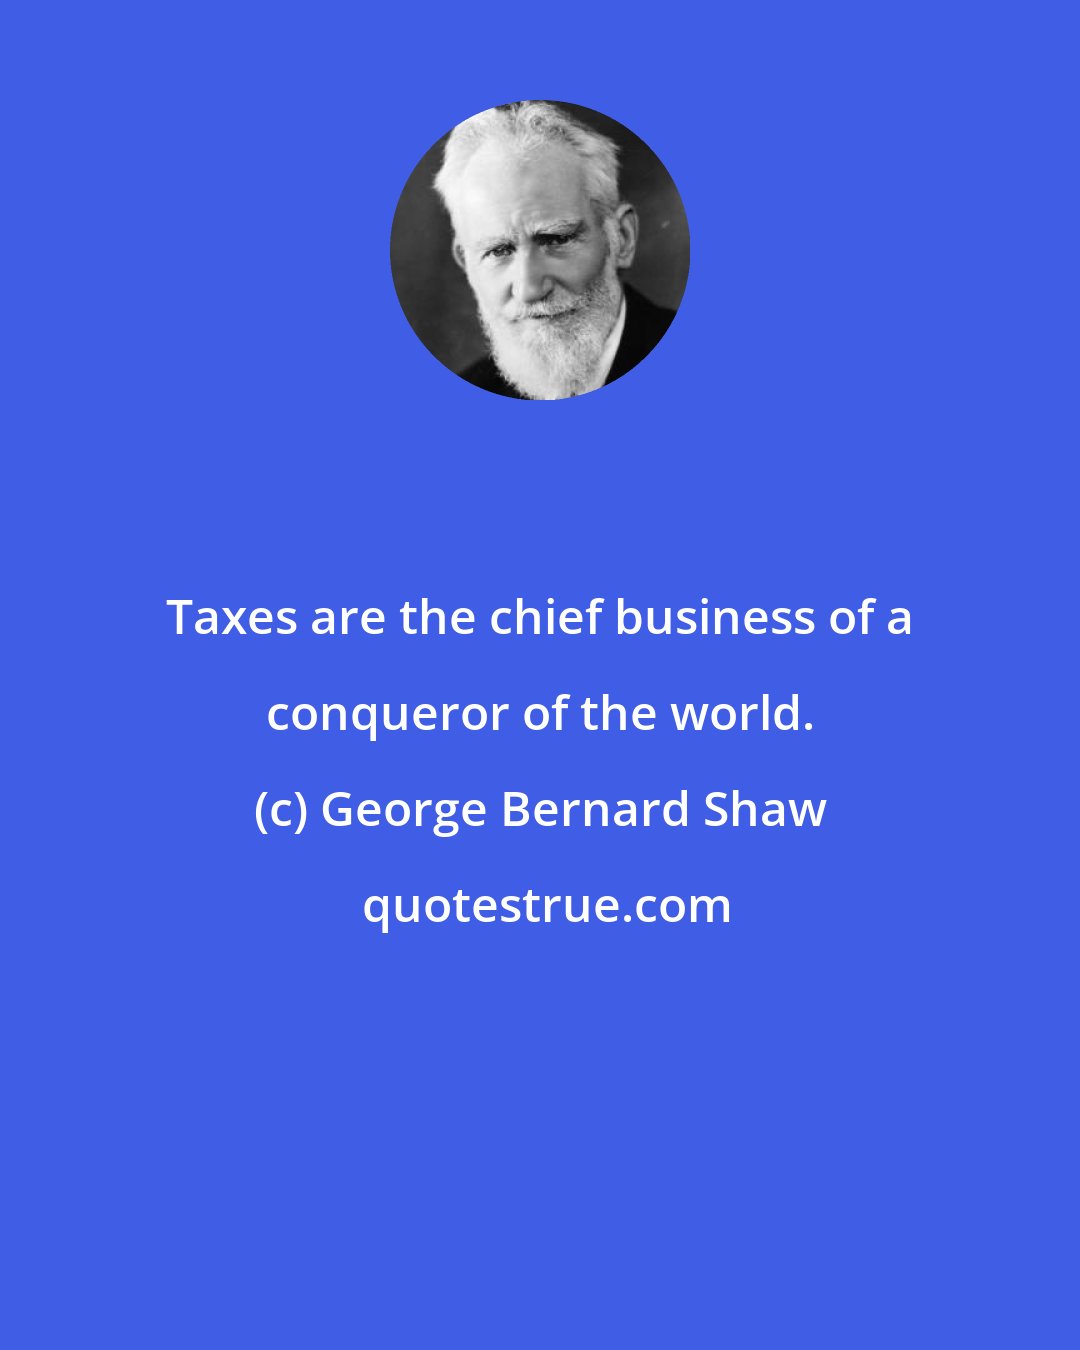 George Bernard Shaw: Taxes are the chief business of a conqueror of the world.